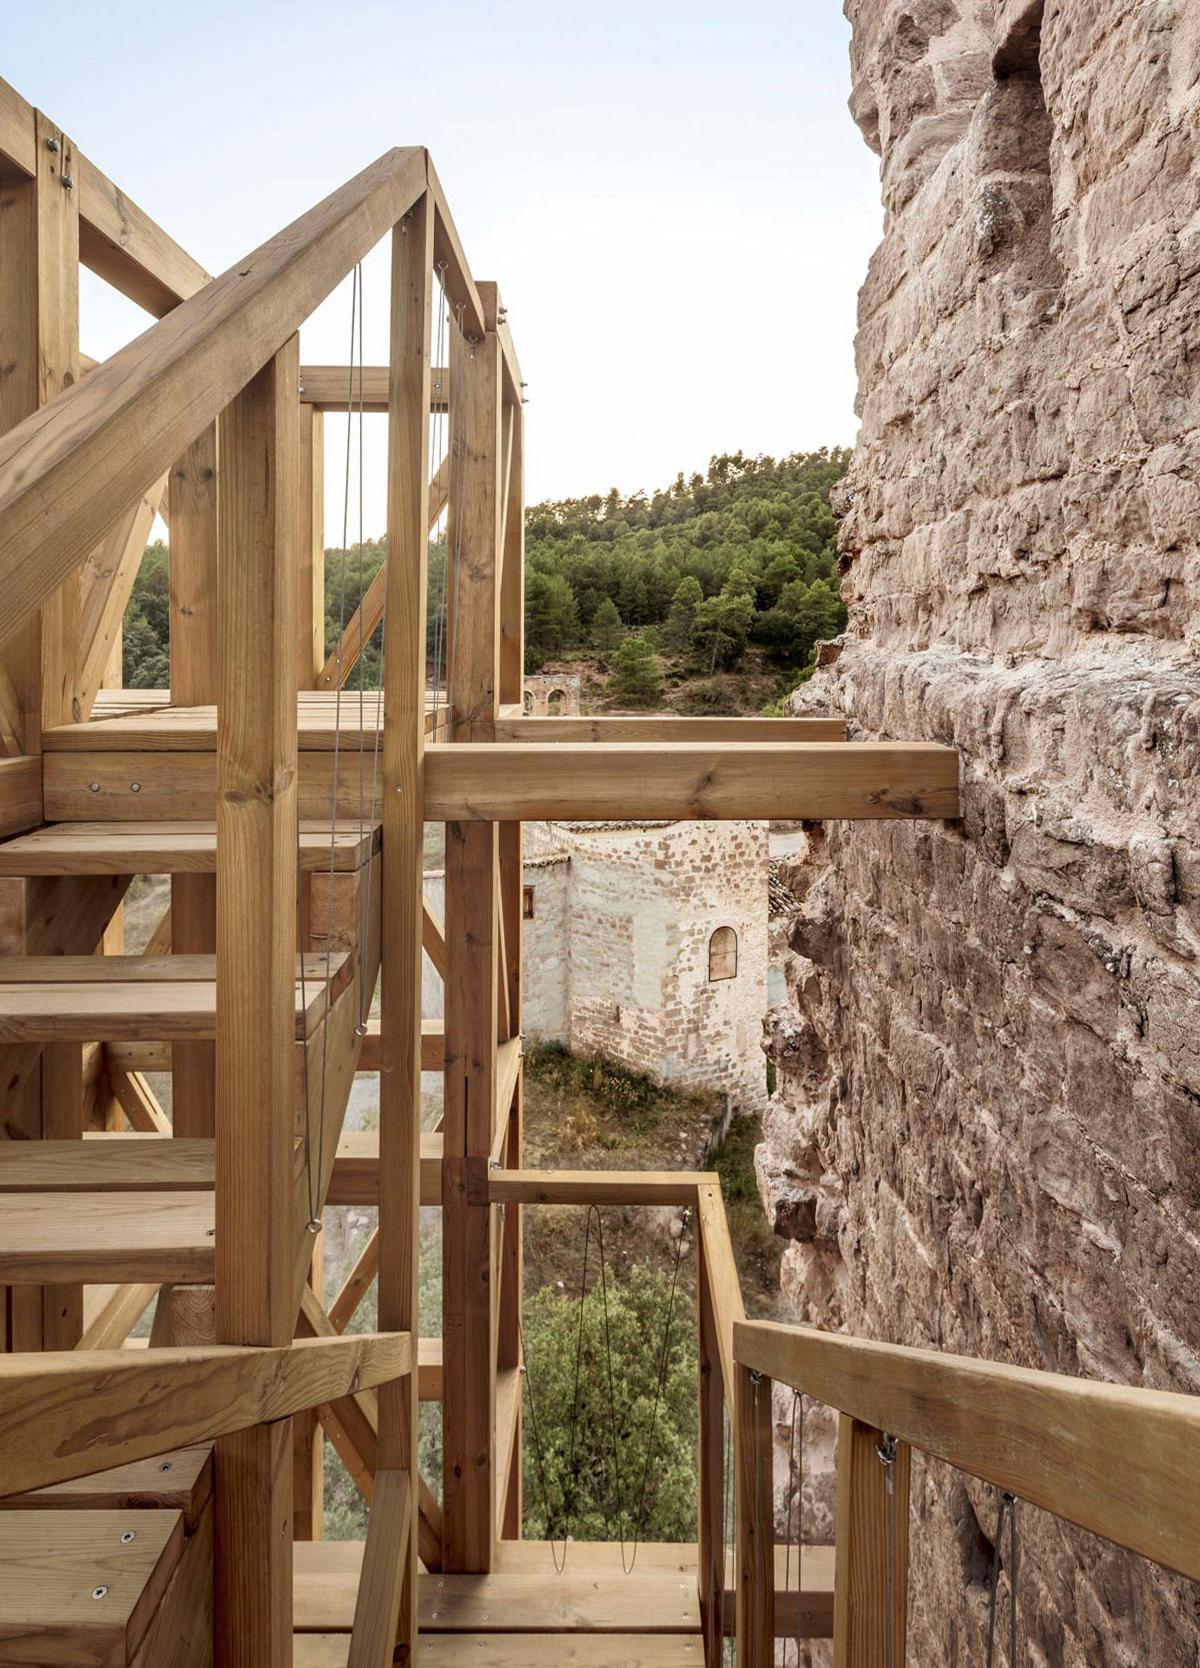 The staircase also makes it possible for visitors to view the remaining portion of the tower right the way up to the top / Carles Enrich Studio